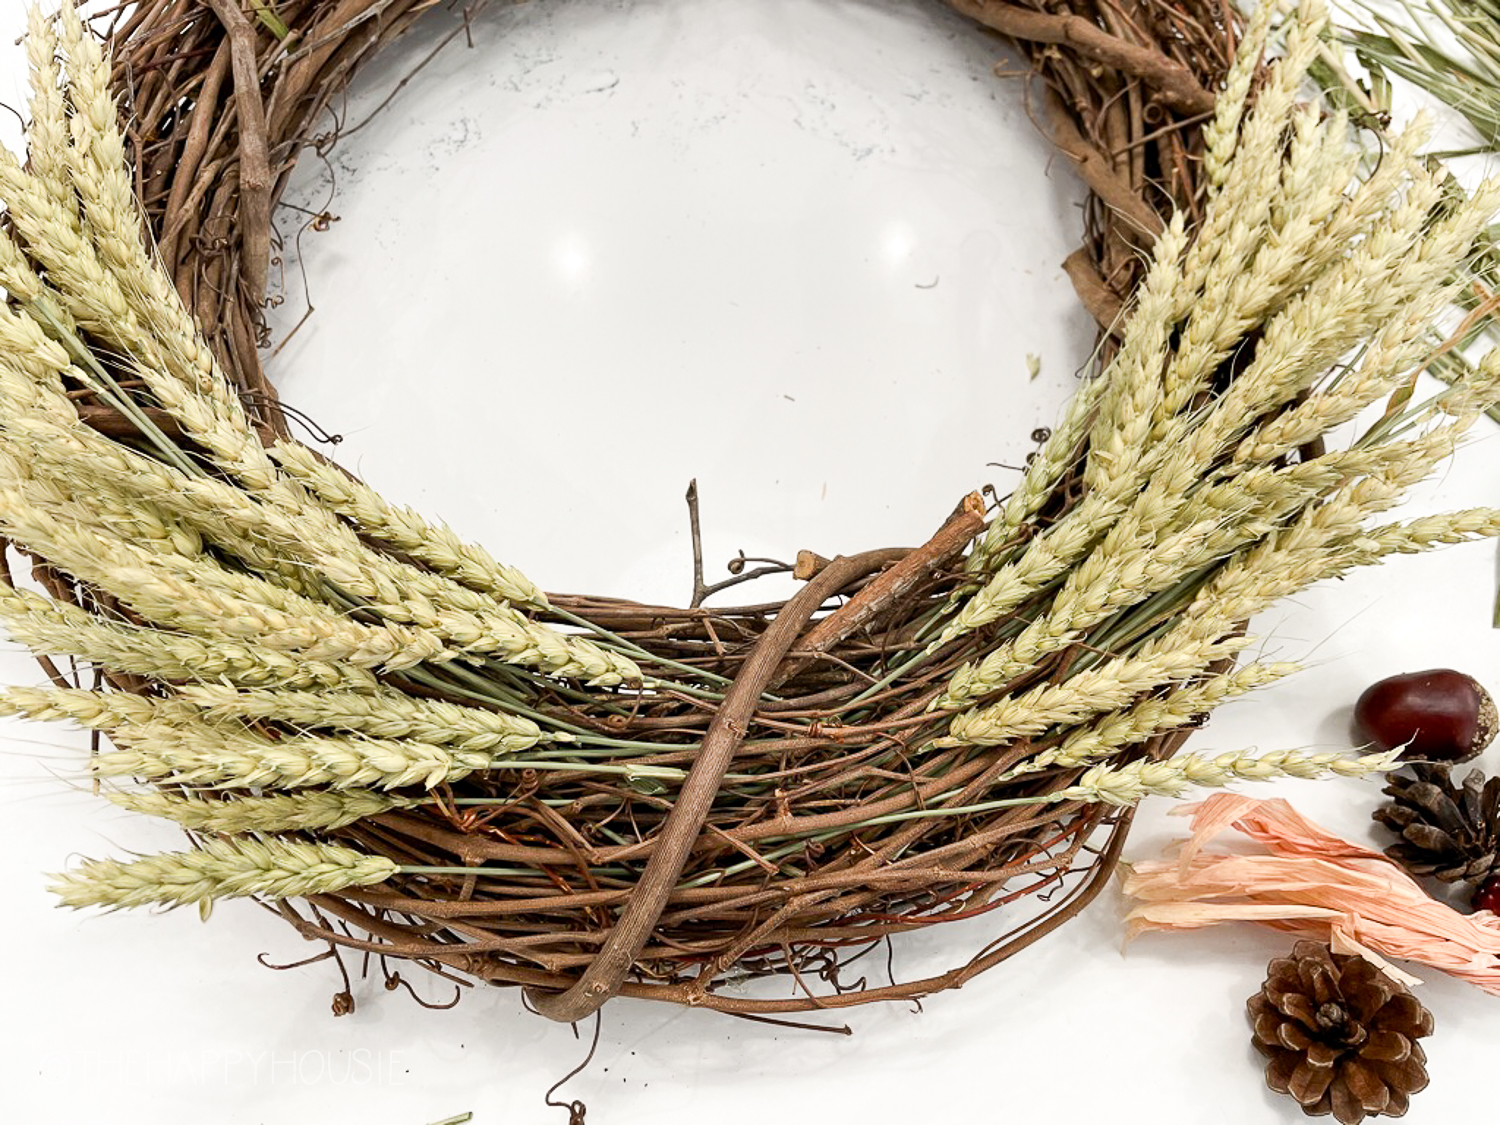 The grapevine wreath with the wheat tucked into it.